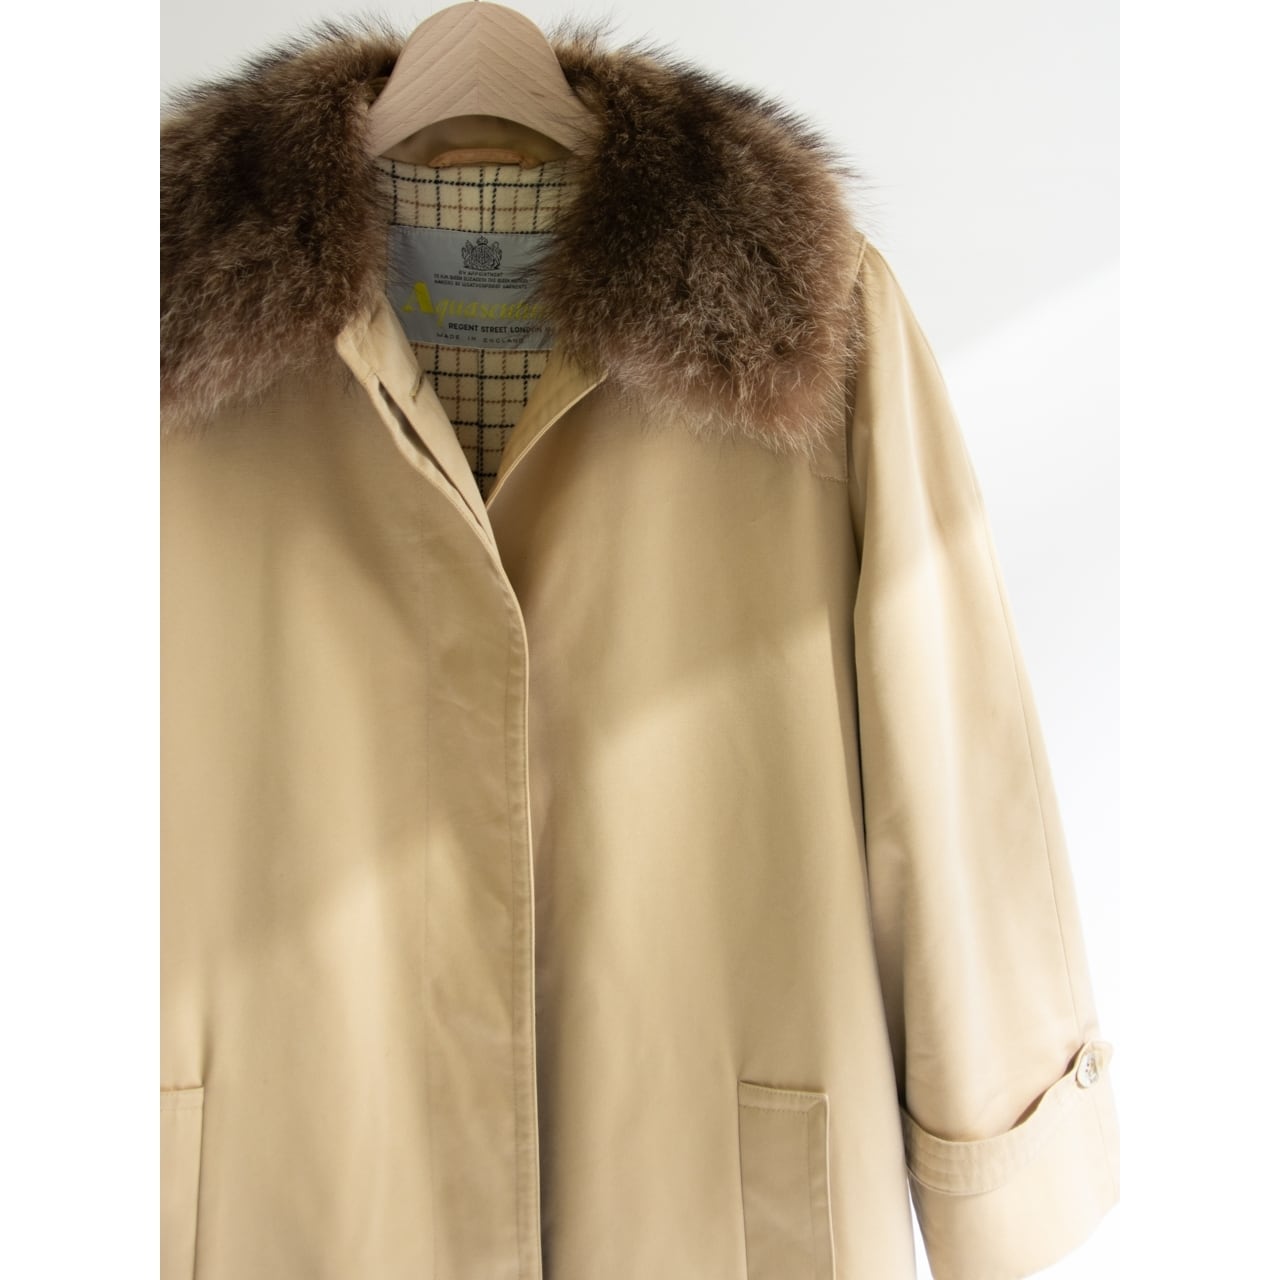 Aquascutum】Made in England 80's Cotton-Polyester Single Coat ...